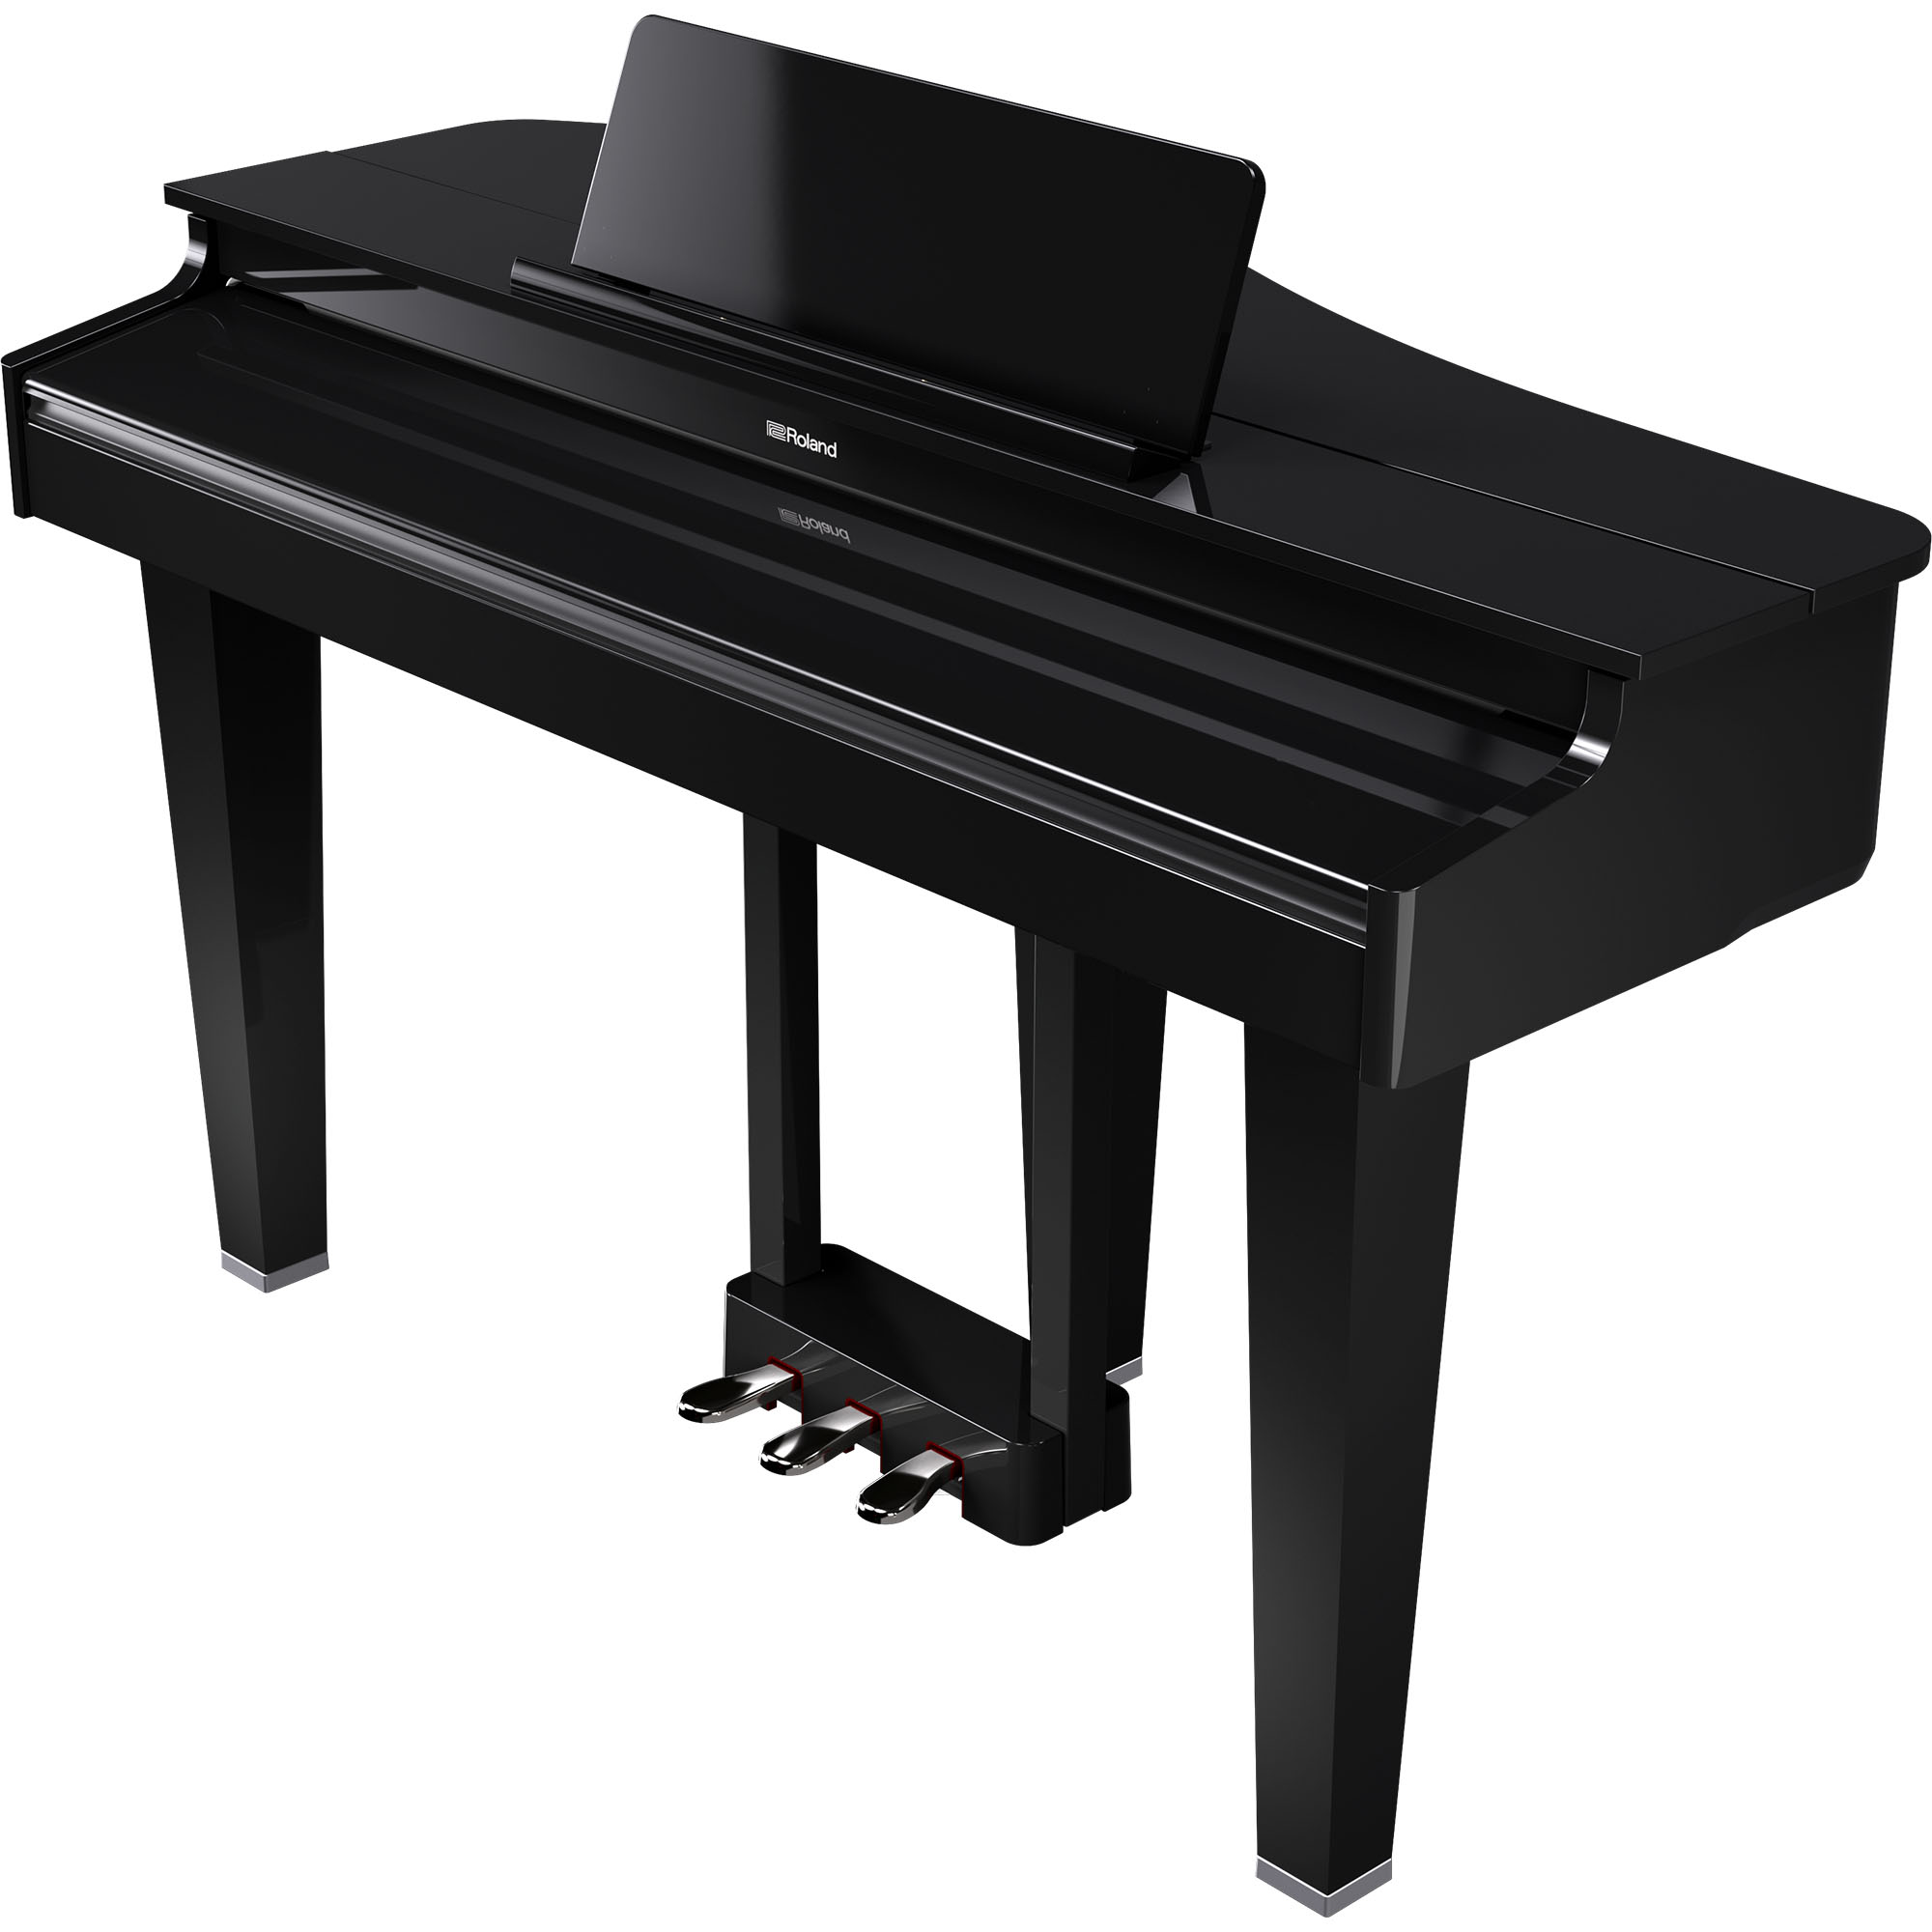 Roland Gp-3 - Digital piano with stand - Variation 1